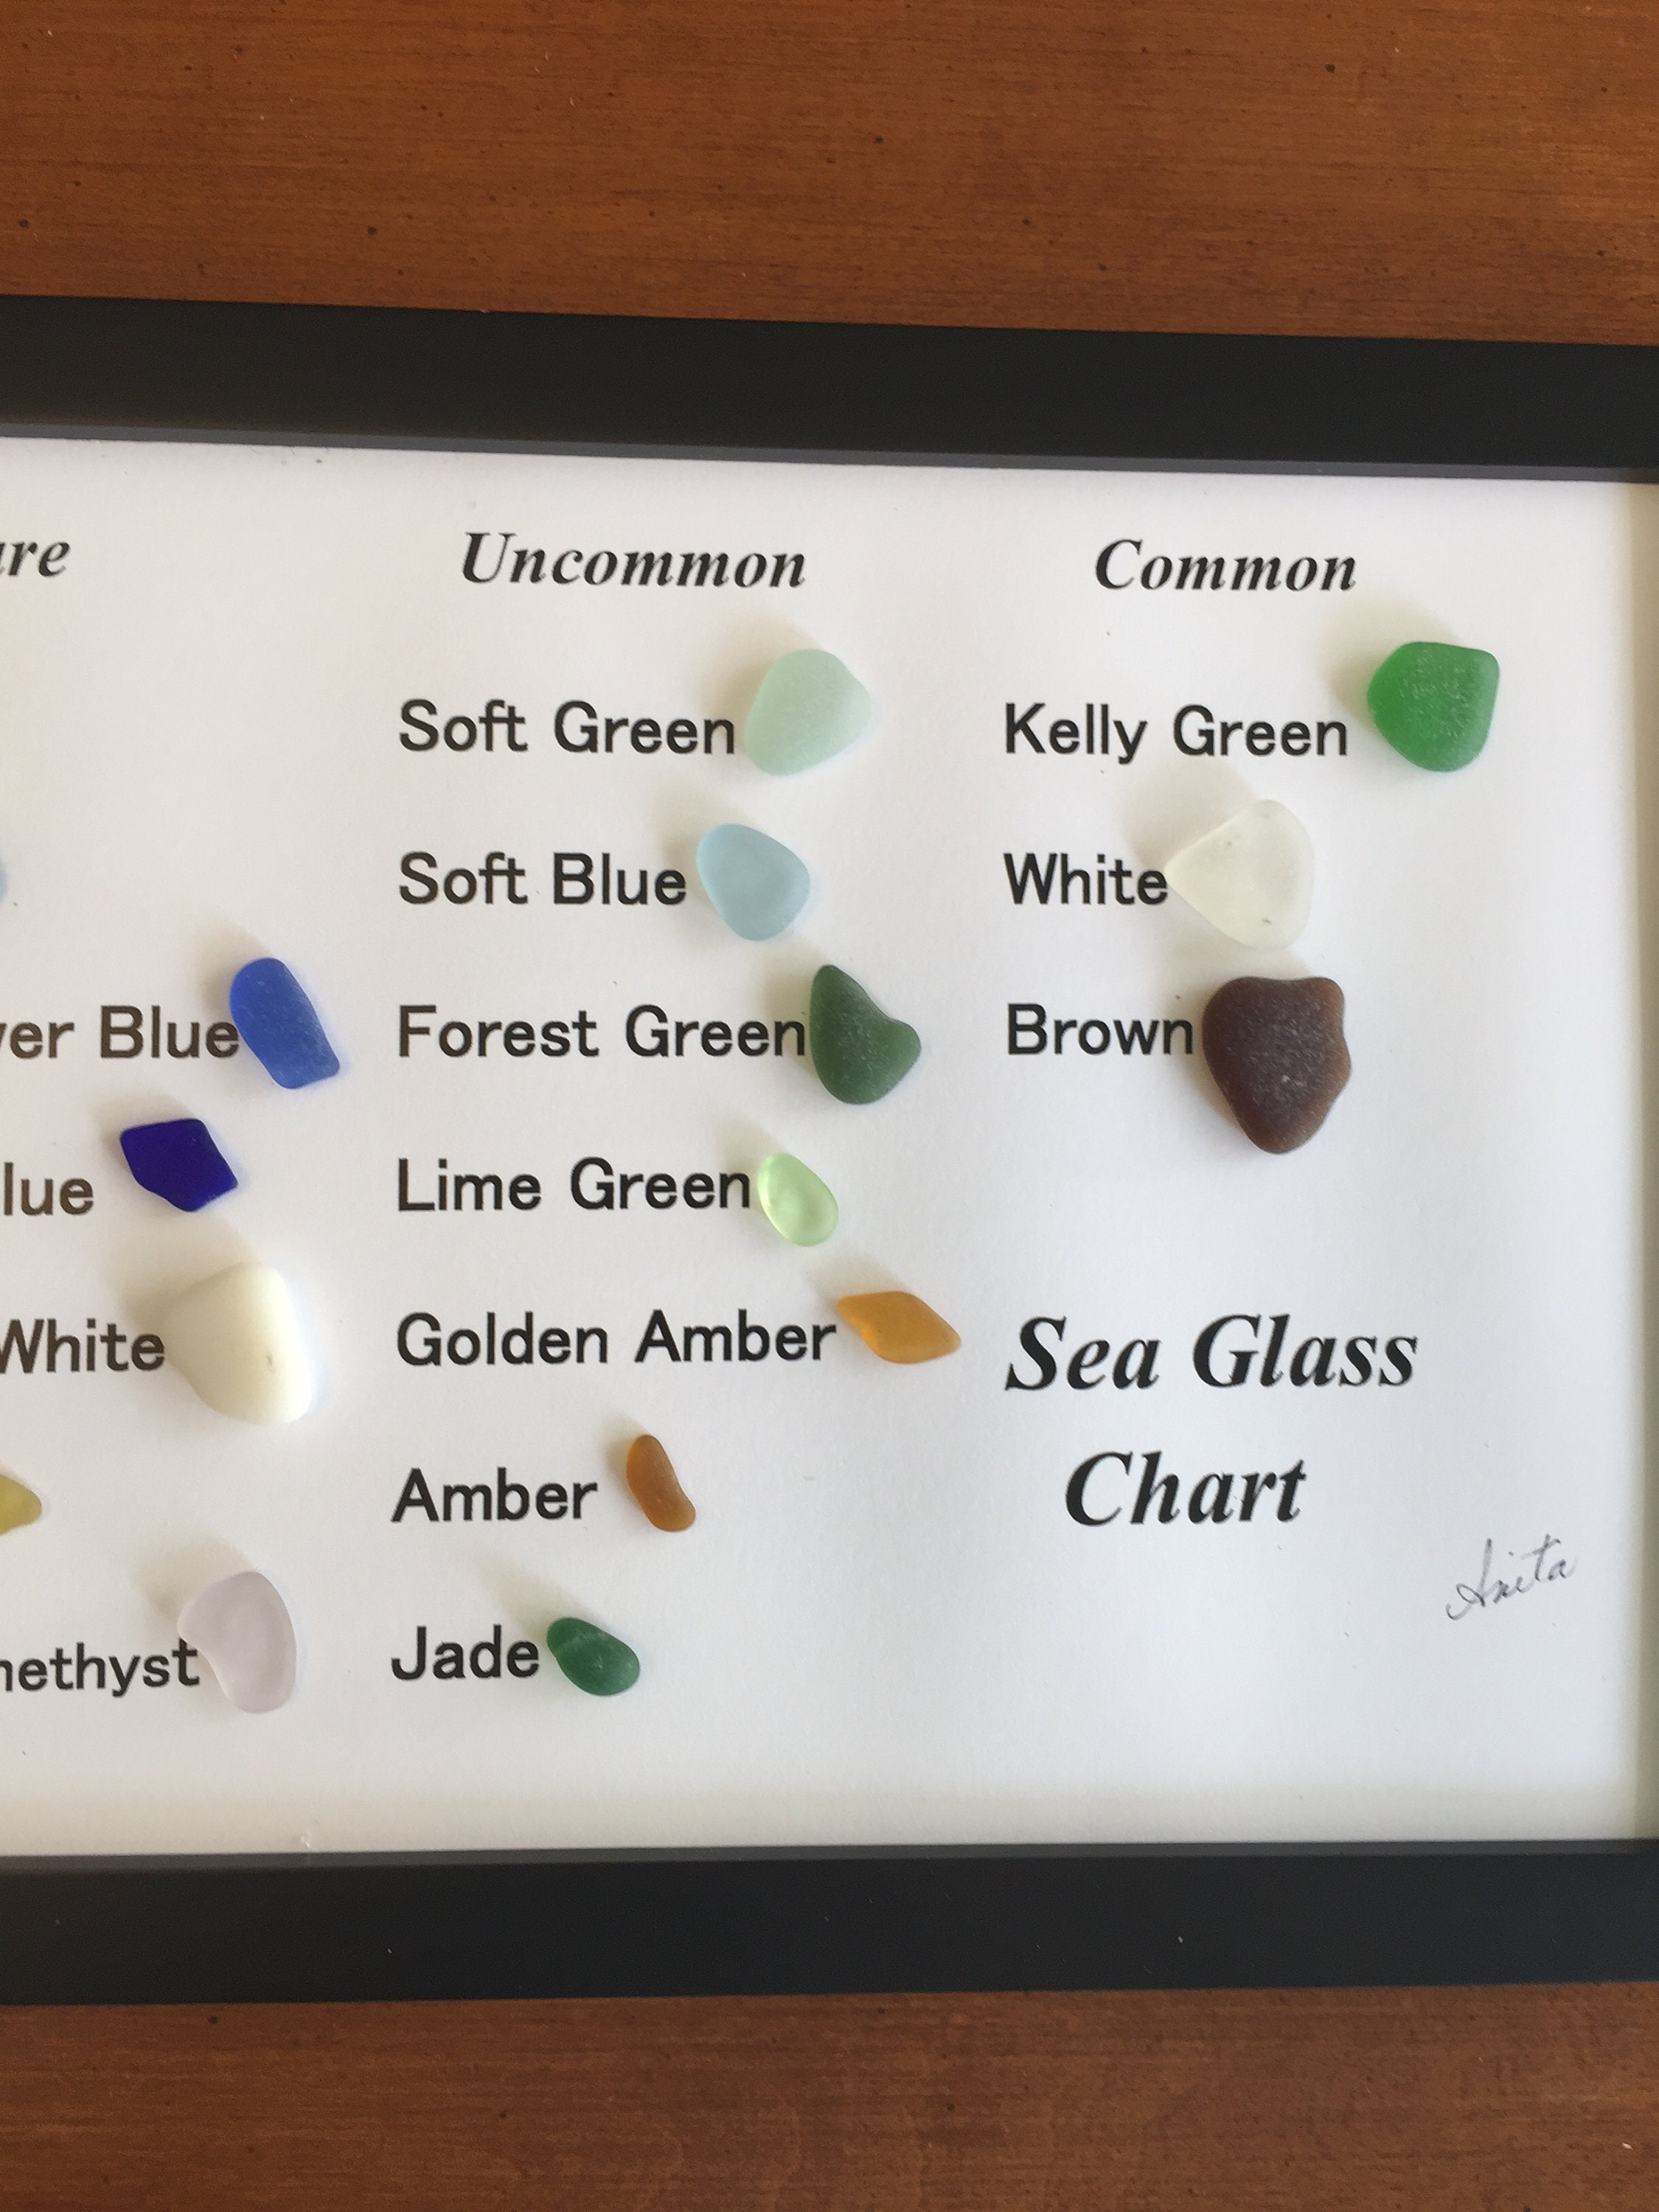 How the Many Types of Sea Glass Get Their Colors